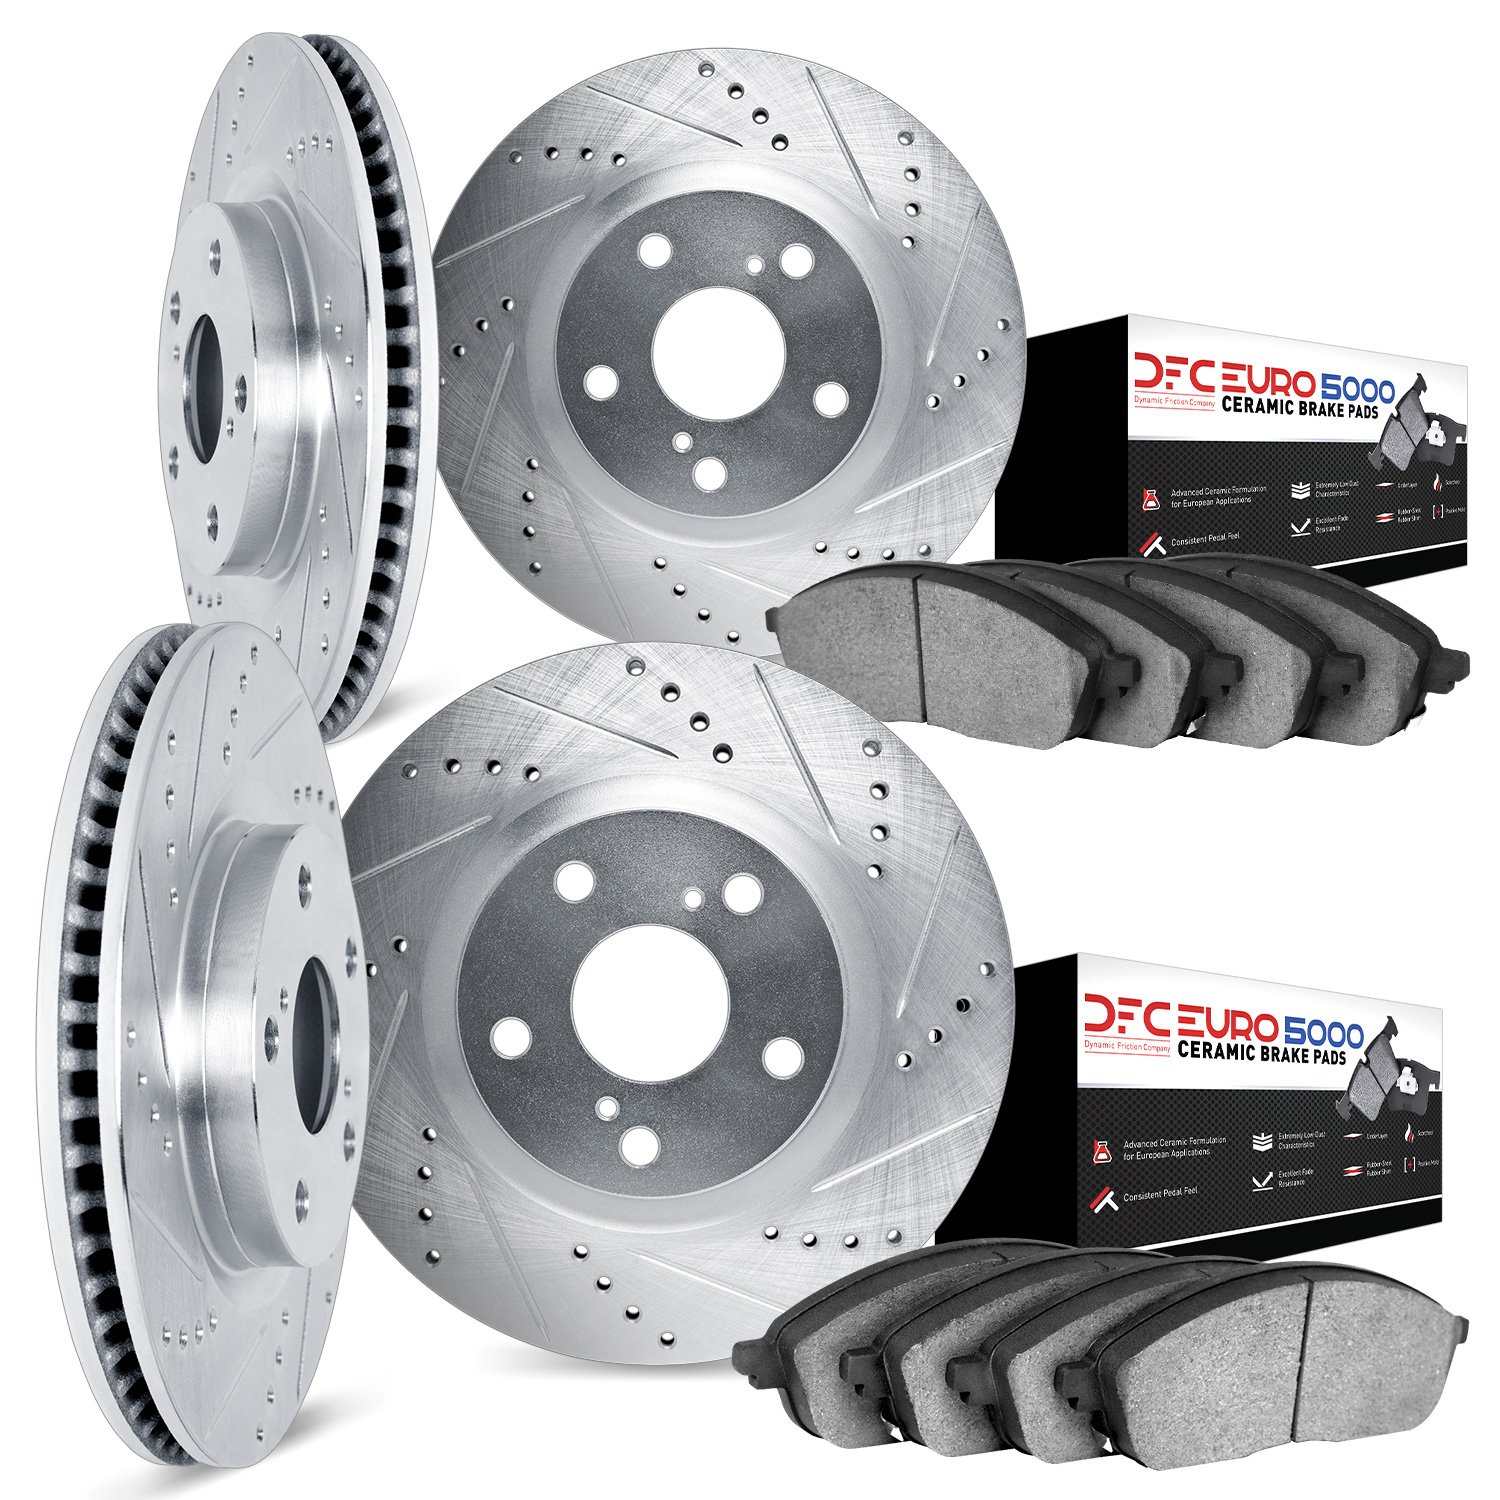 7604-31018 Drilled/Slotted Brake Rotors w/5000 Euro Ceramic Brake Pads Kit [Silver], 2006-2006 BMW, Position: Front and Rear